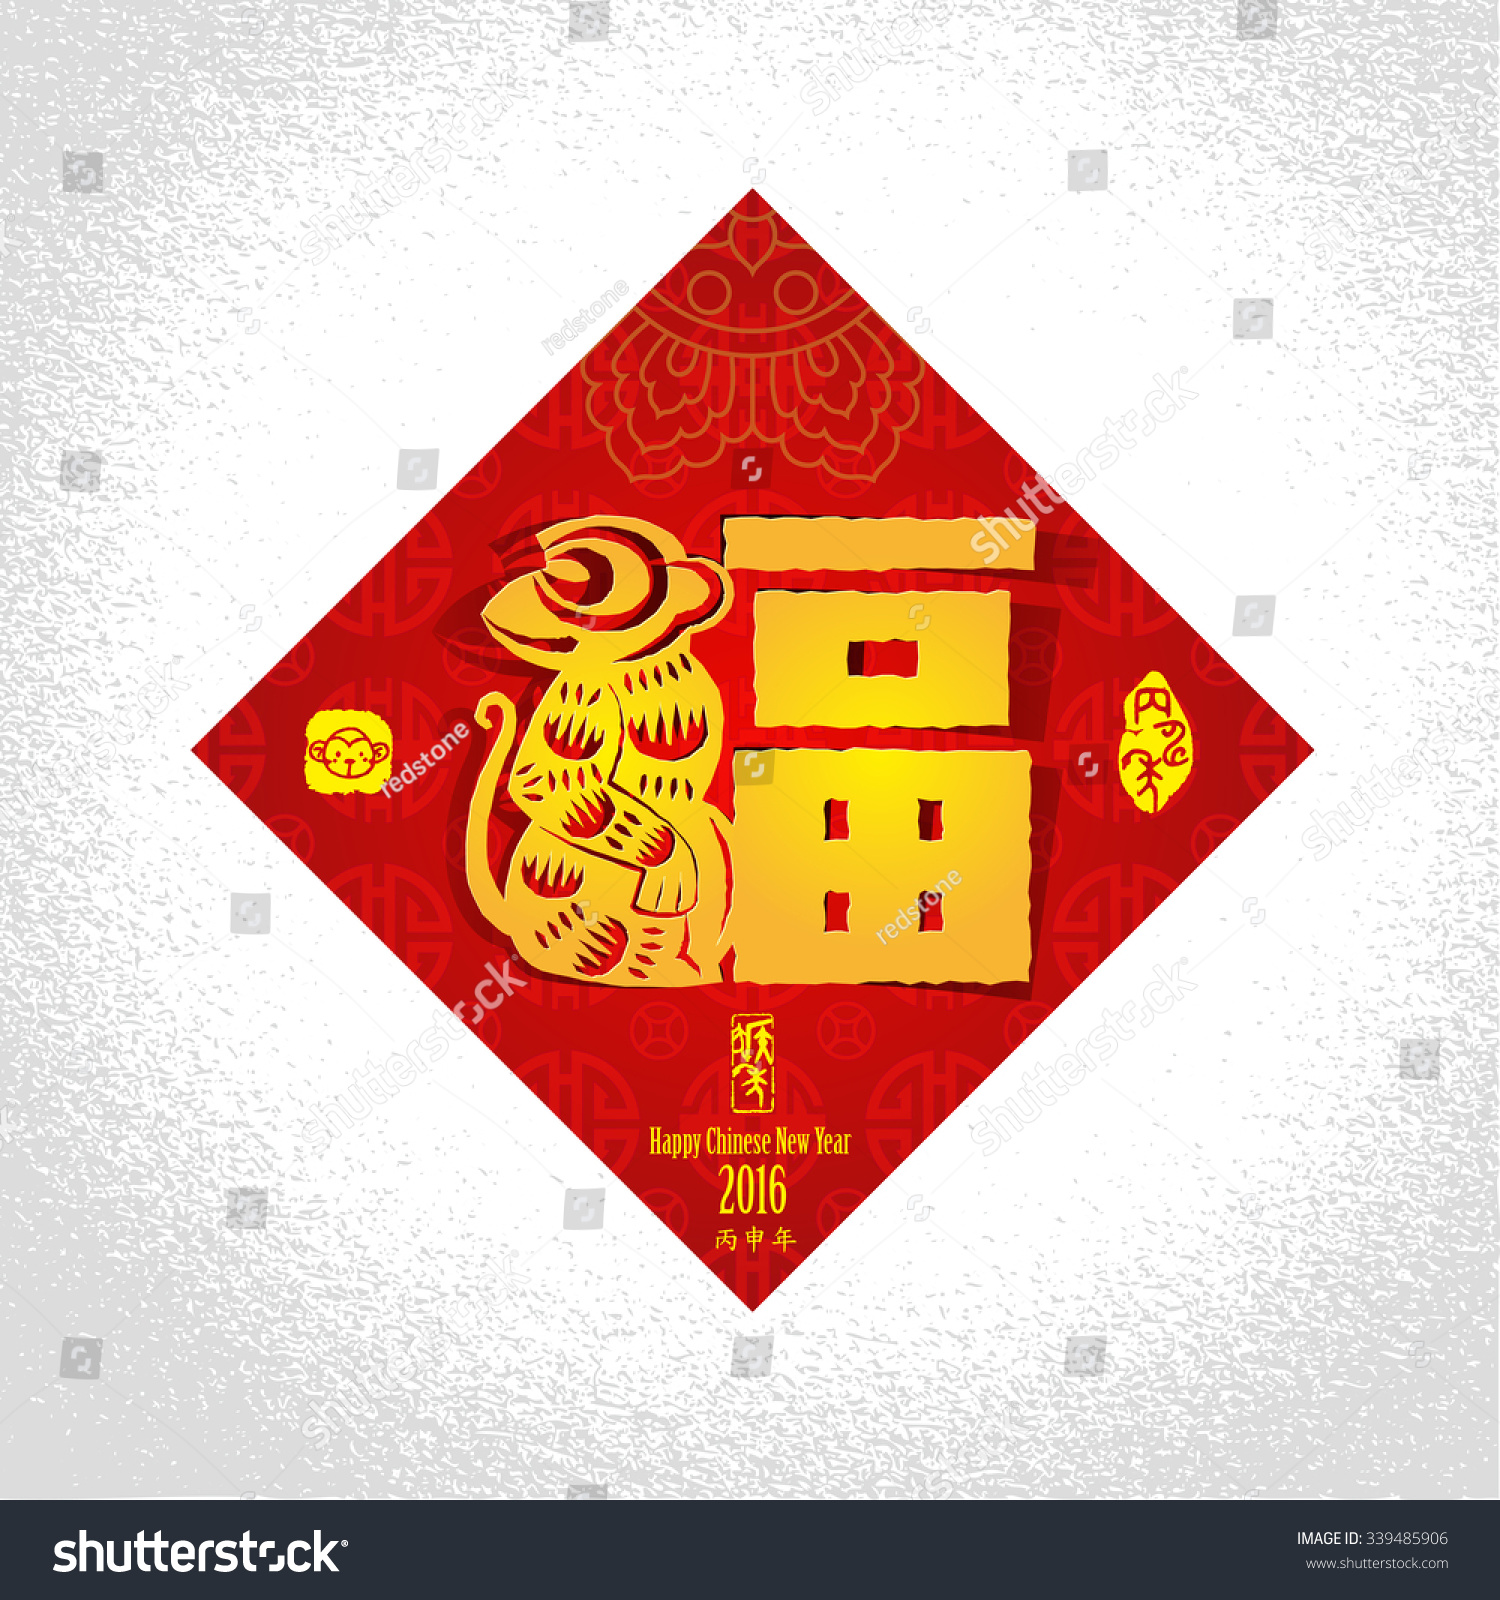 Chinese New Year Greeting Card Background Stock Photo (Photo, Vector ...